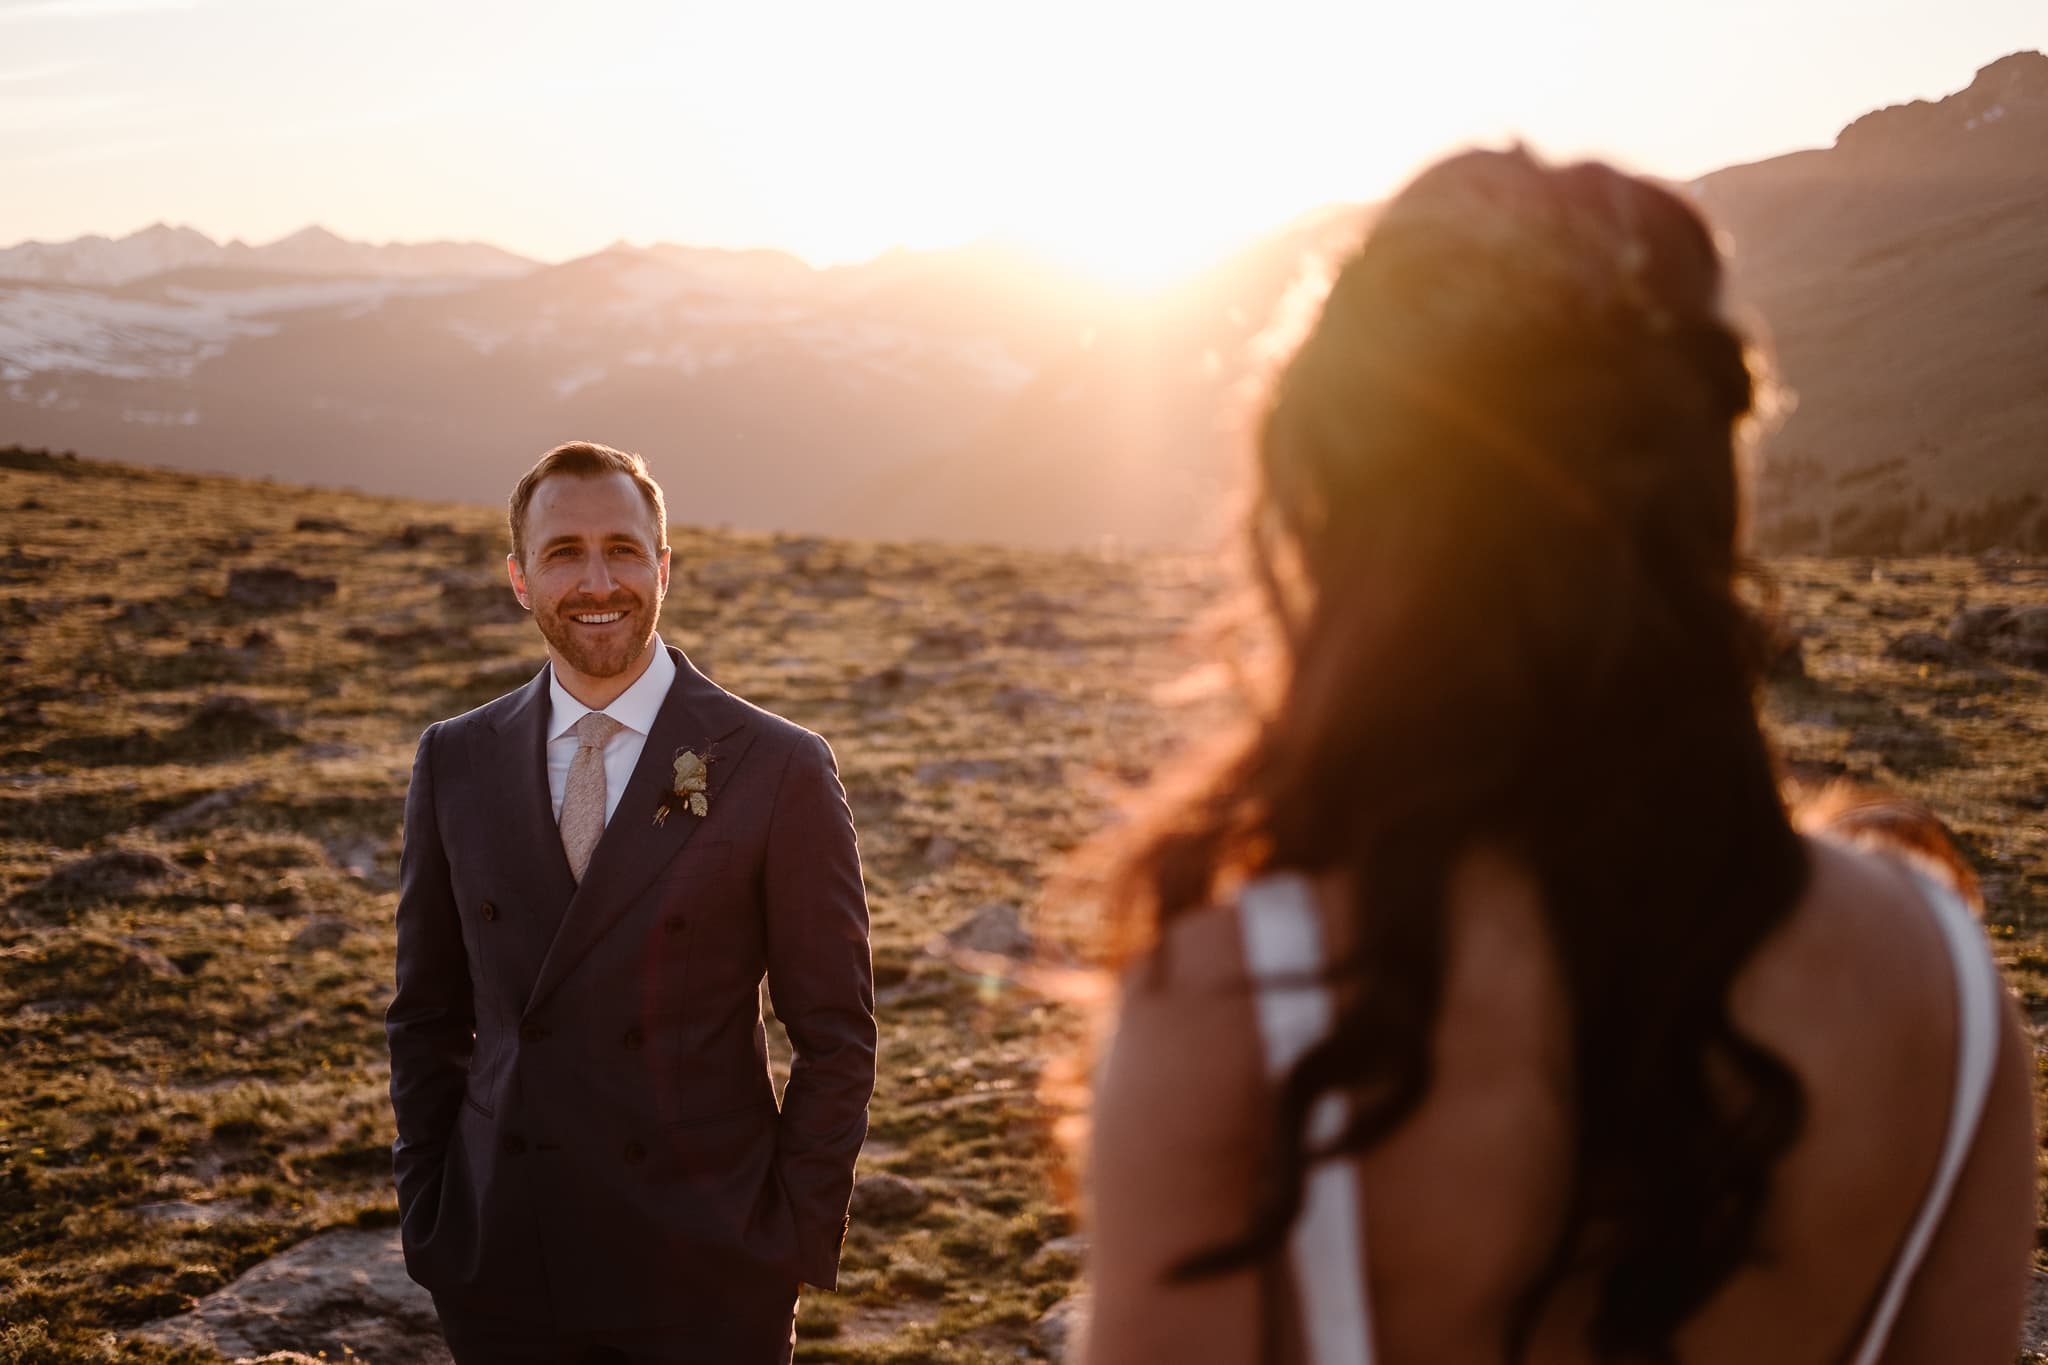 Trail Ridge Road Elopement Photographer, Colorado adventure wedding photography, mountain hiking elopement, bride and groom at sunset